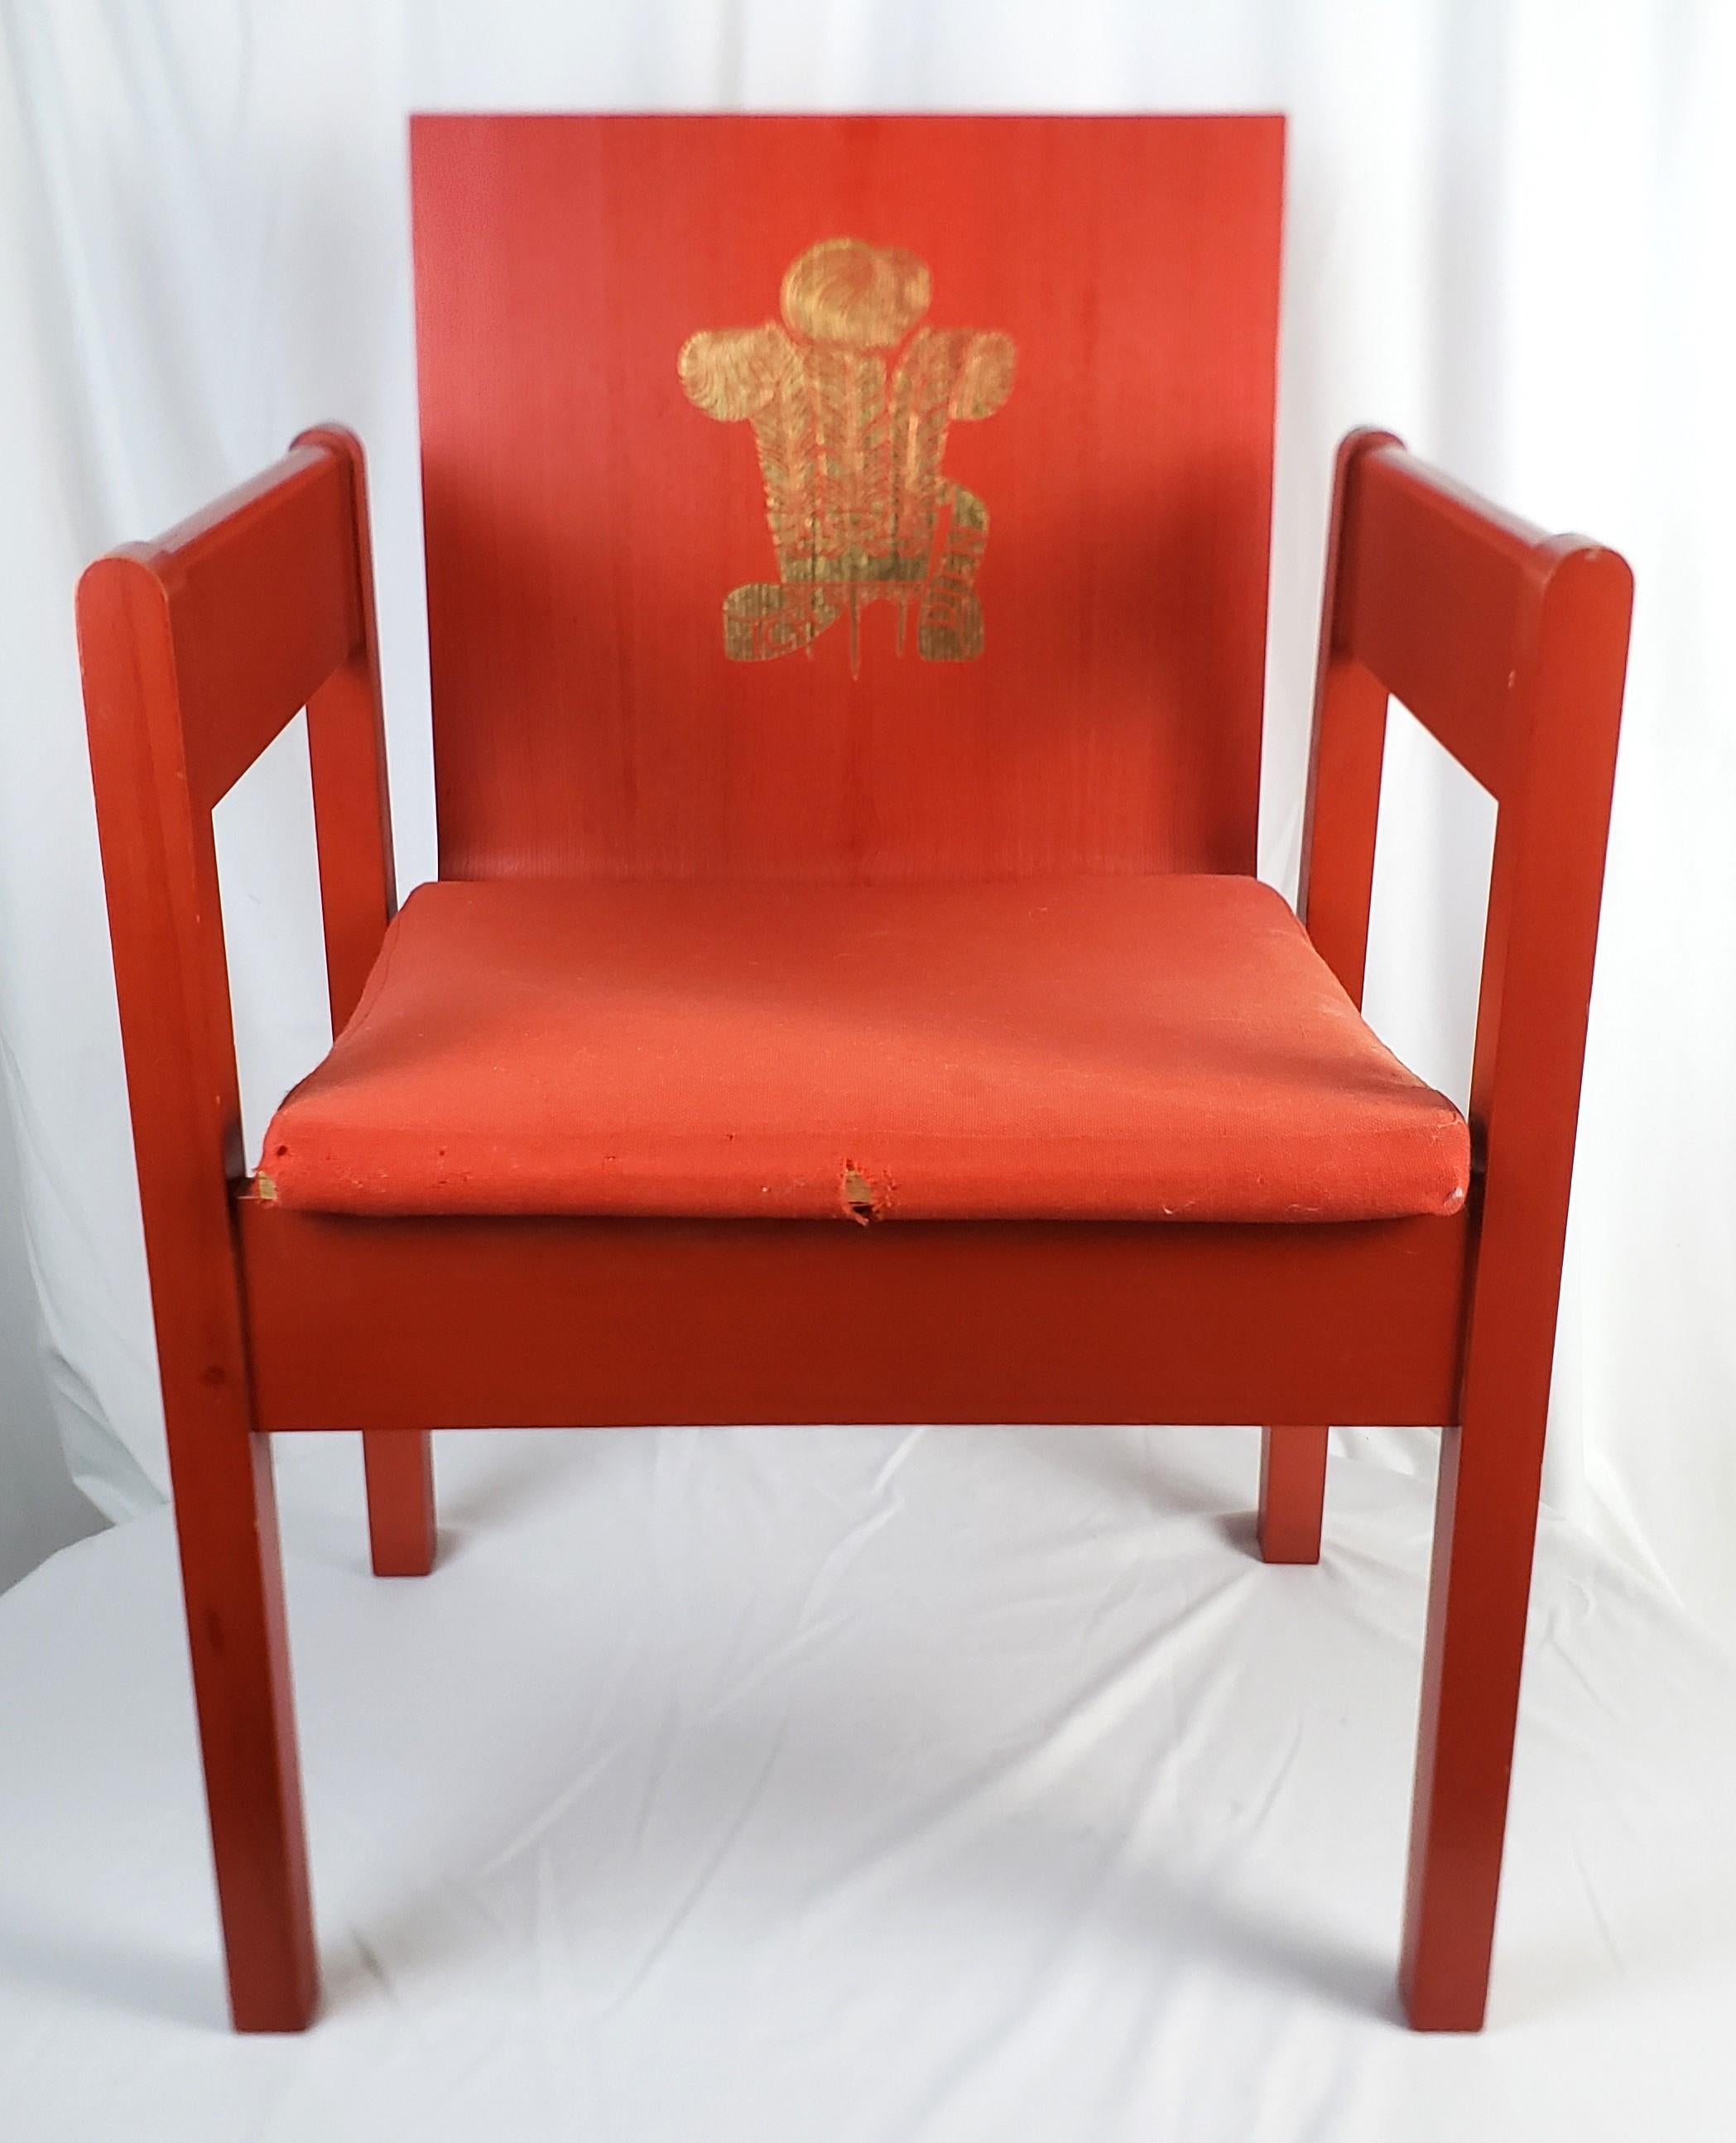 This chair was designed by Lord Snowden in 1969 and produced by Remploy for the Investiture ceremony of Prince Charles, and done in the period Mid-Cetury Modern style. The chair is made of ash with a bentwood back and painted in a bright red with